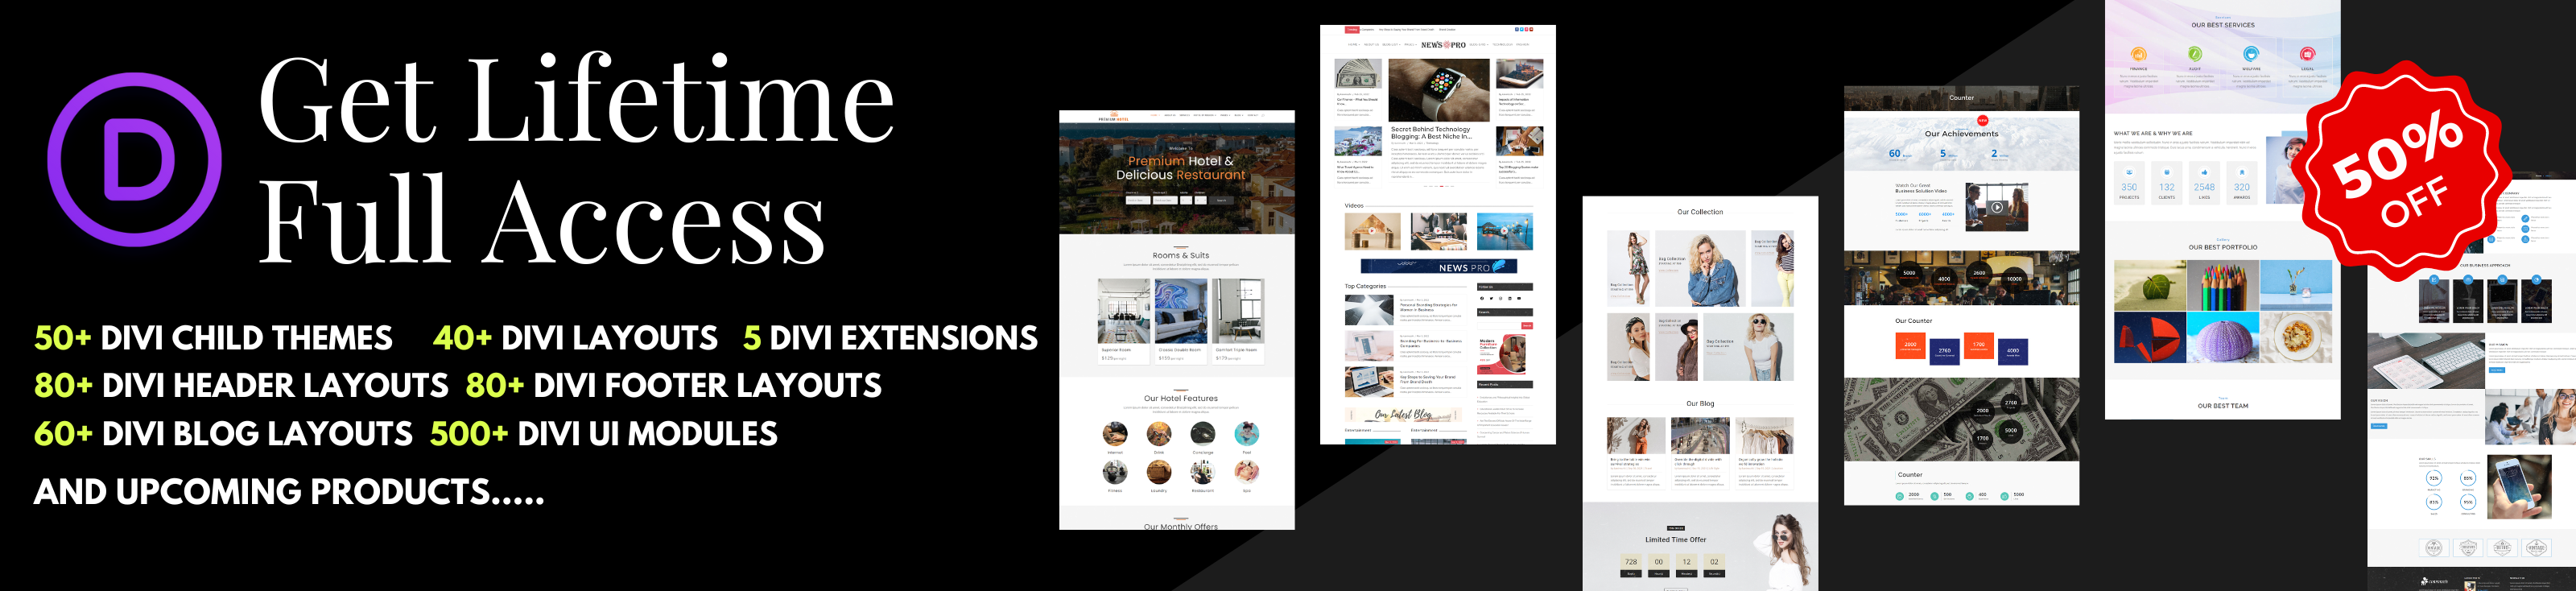 Jano - Responsive Email Template